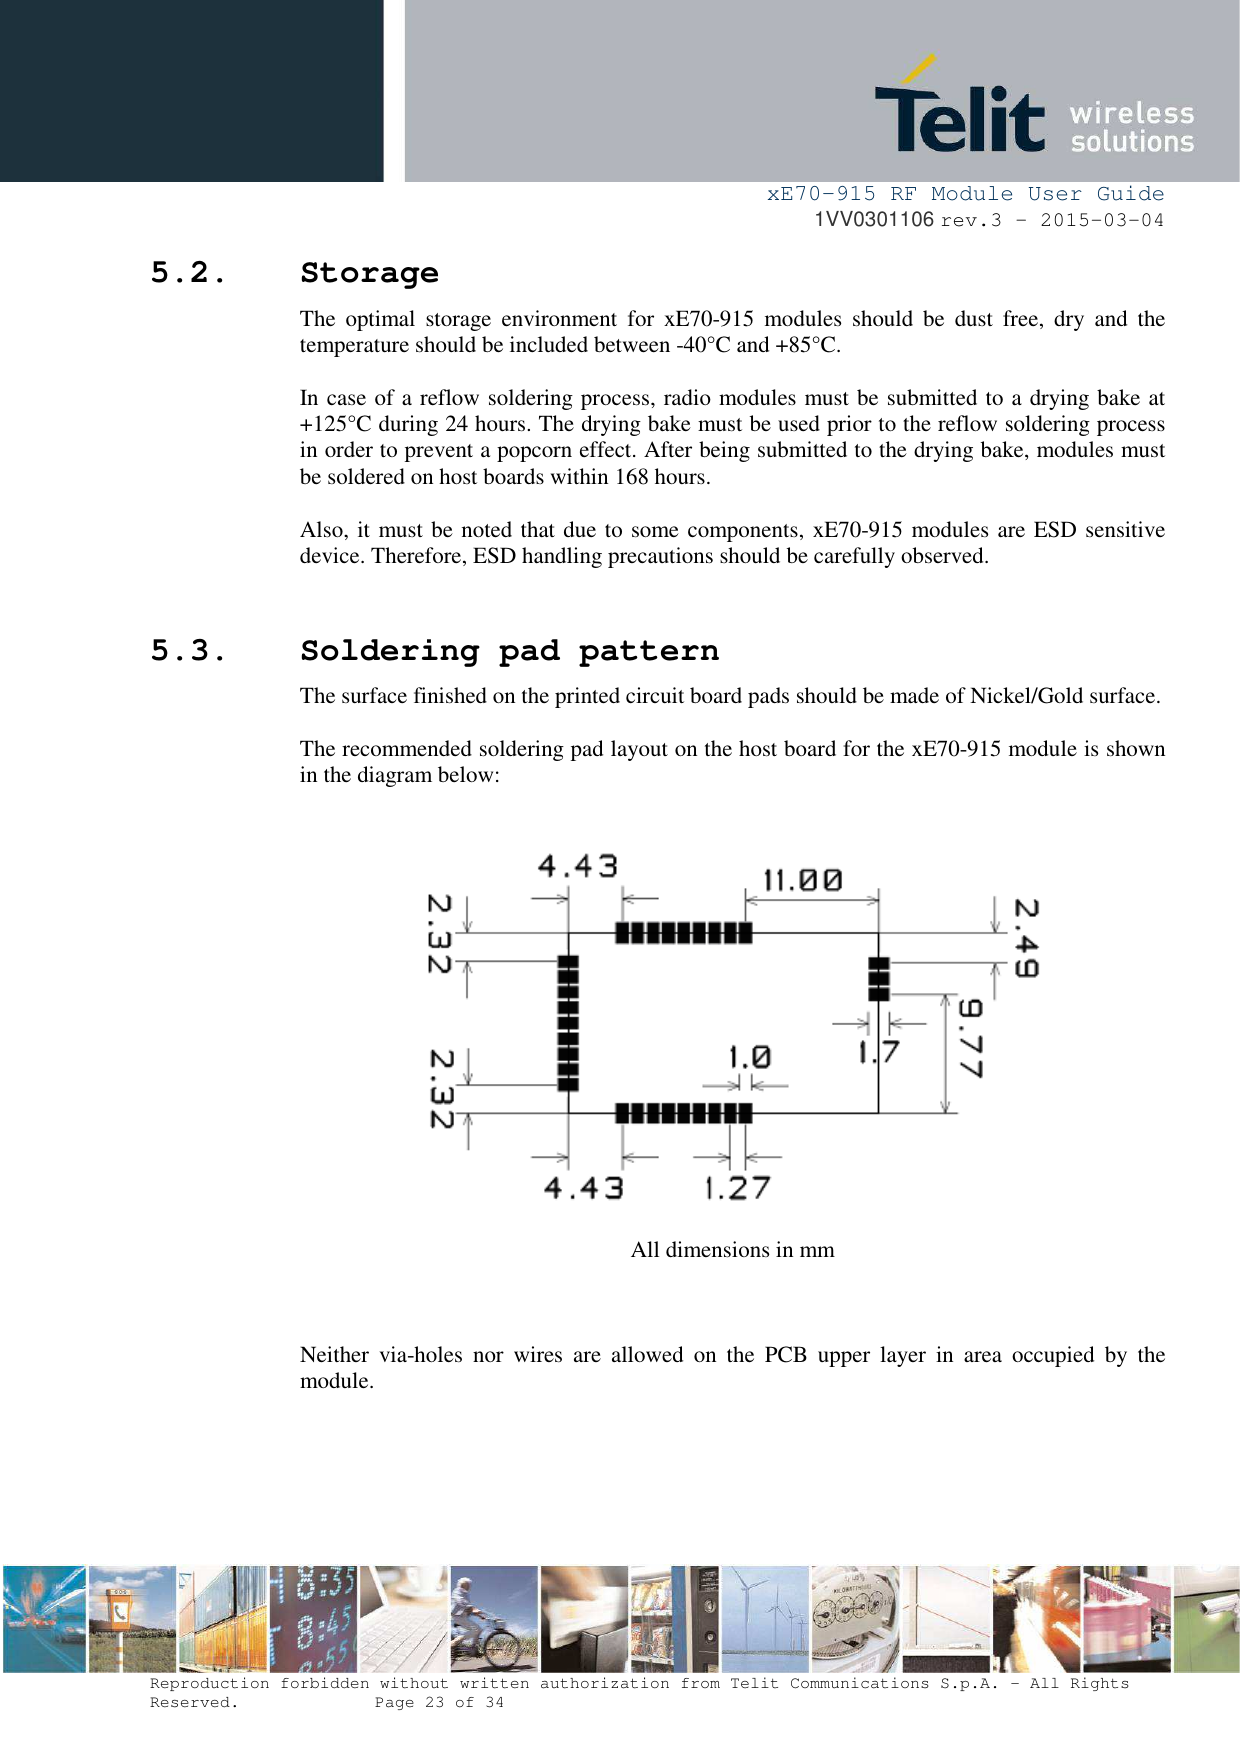     xE70-915 RF Module User Guide 1VV0301106 rev.3 – 2015-03-04  Reproduction forbidden without written authorization from Telit Communications S.p.A. - All Rights Reserved.    Page 23 of 34  5.2. Storage The  optimal  storage  environment  for  xE70-915  modules  should  be  dust  free,  dry  and  the temperature should be included between -40°C and +85°C.  In case of a reflow soldering process, radio modules must be submitted to a drying bake at +125°C during 24 hours. The drying bake must be used prior to the reflow soldering process in order to prevent a popcorn effect. After being submitted to the drying bake, modules must be soldered on host boards within 168 hours.   Also, it must be noted that due to some components, xE70-915 modules are ESD sensitive device. Therefore, ESD handling precautions should be carefully observed.  5.3. Soldering pad pattern The surface finished on the printed circuit board pads should be made of Nickel/Gold surface.   The recommended soldering pad layout on the host board for the xE70-915 module is shown in the diagram below:     All dimensions in mm    Neither  via-holes  nor  wires  are  allowed  on  the  PCB  upper  layer  in  area  occupied  by  the module. 